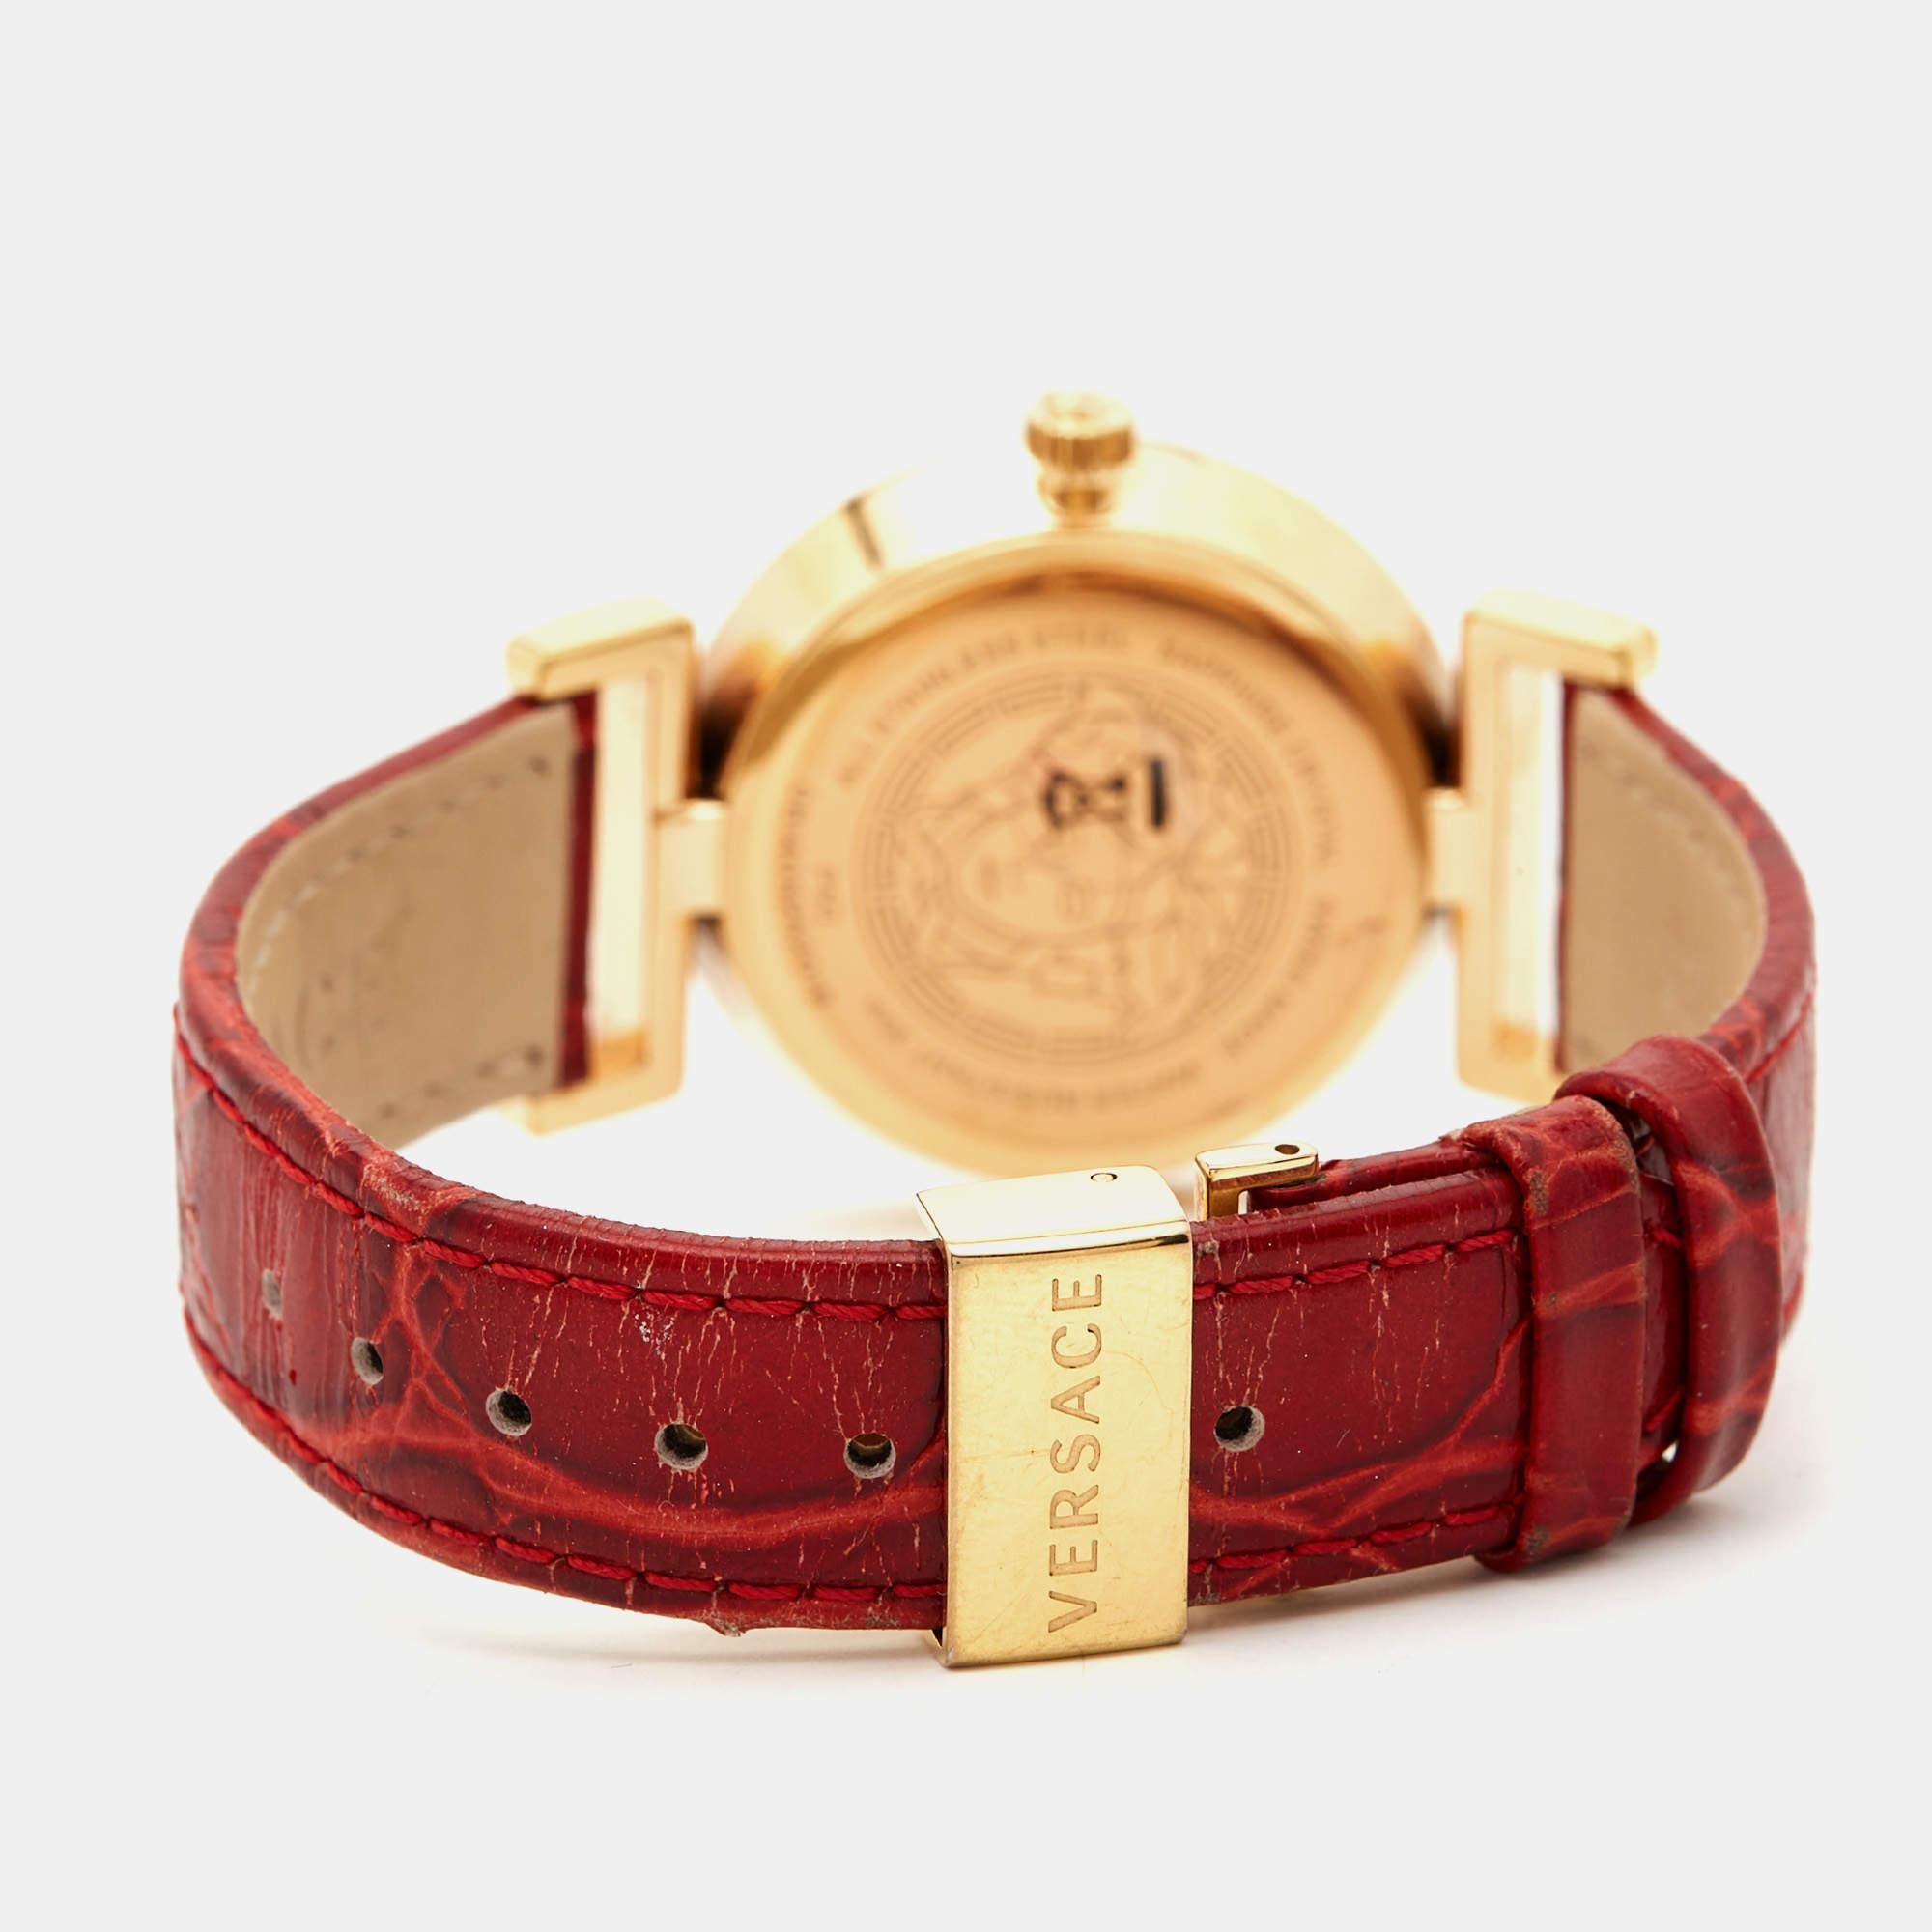 Accessorize your wrist with this luxuriously designed Vanity wristwatch by Versace. It features a round gold-plated stainless steel case and a riveted bezel. The watch has a red dial with studs for hour markers. It fixes on the wrist with a metal